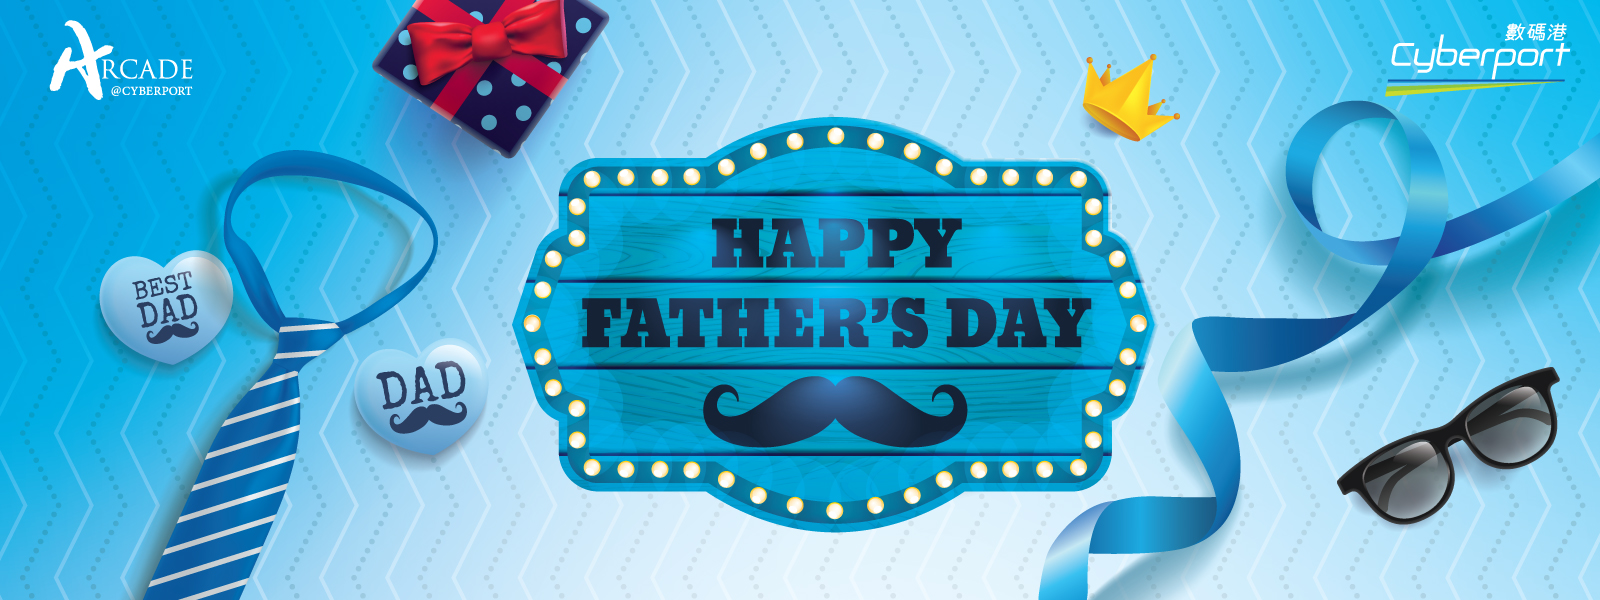 Arcade@Cyberport – “Happy Father’s Day – Limited Time Rewards”